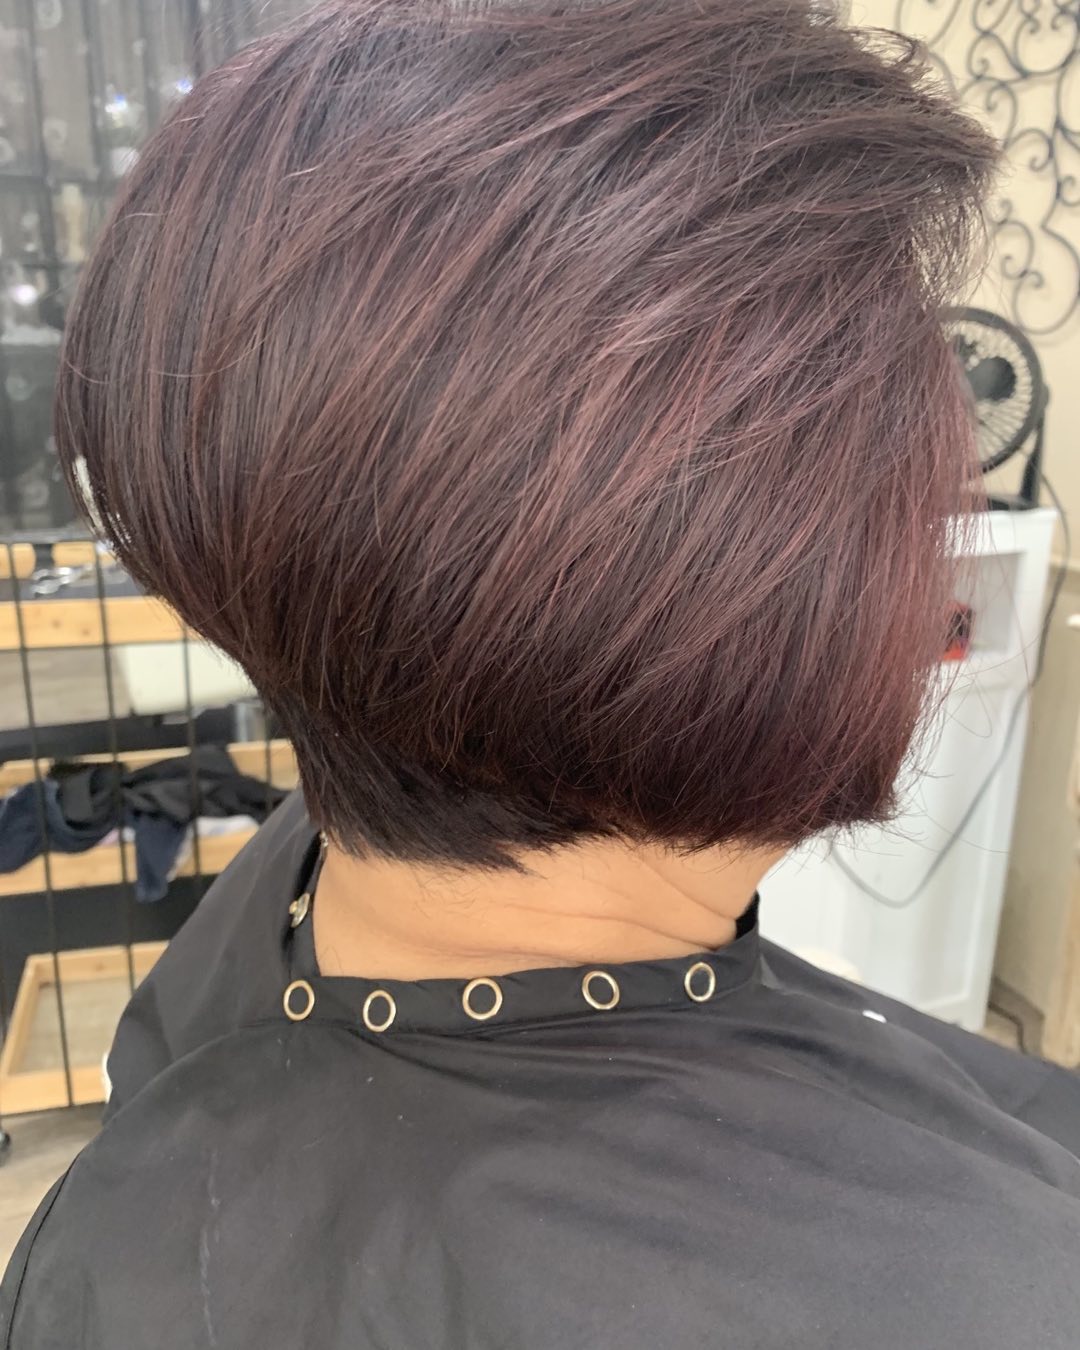 Stacked Bob 55 Long stacked bob | Medium length stacked bob | Pictures of stacked bob haircuts front and back Stacked Bob Hairstyles for Women